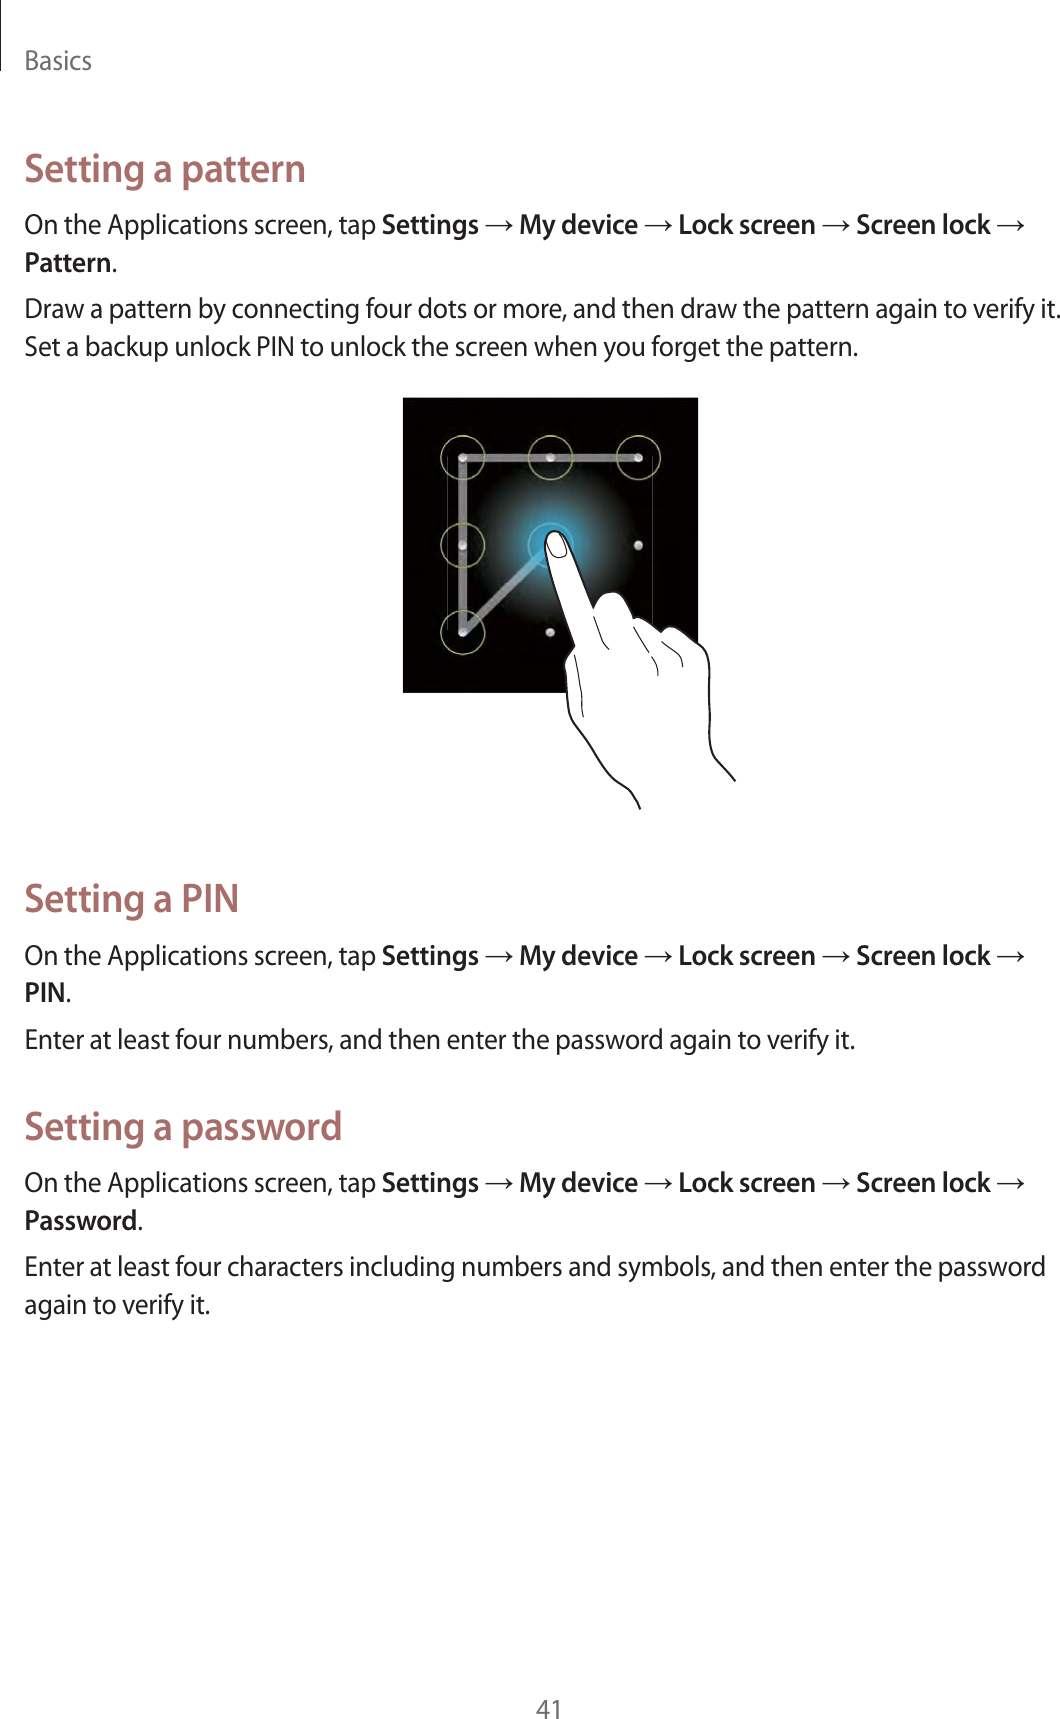 Basics41Setting a patternOn the Applications screen, tap Settings ĺ My device ĺ Lock screen ĺ Screen lock ĺ Pattern.Draw a pattern by connecting four dots or more, and then draw the pattern again to verify it. Set a backup unlock PIN to unlock the screen when you forget the pattern.Setting a PINOn the Applications screen, tap Settings ĺ My device ĺ Lock screen ĺ Screen lock ĺ PIN.Enter at least four numbers, and then enter the password again to verify it.Setting a passwordOn the Applications screen, tap Settings ĺ My device ĺ Lock screen ĺ Screen lock ĺ Password.Enter at least four characters including numbers and symbols, and then enter the password again to verify it.